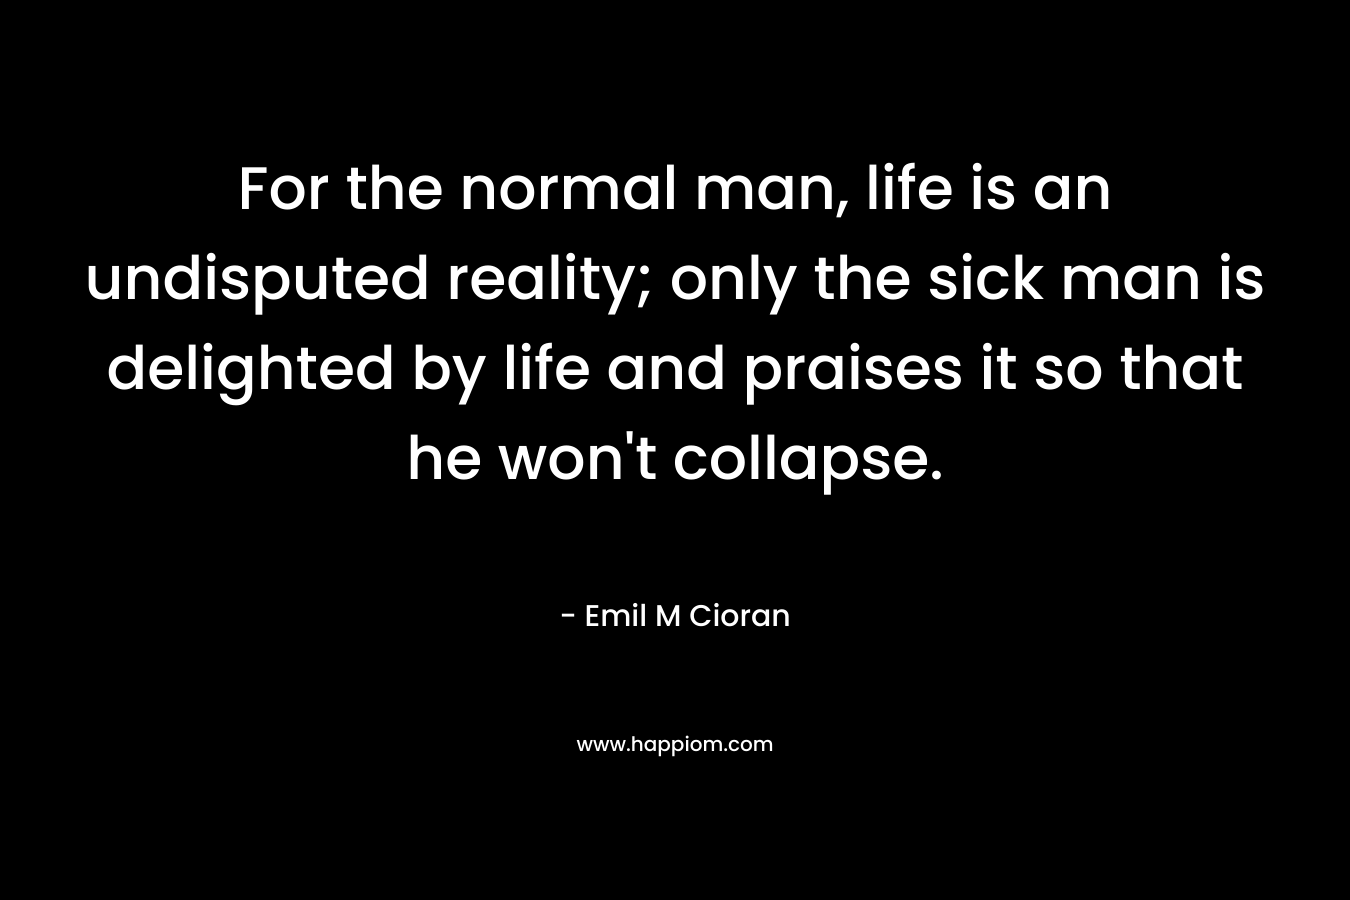 For the normal man, life is an undisputed reality; only the sick man is delighted by life and praises it so that he won’t collapse. – Emil M Cioran